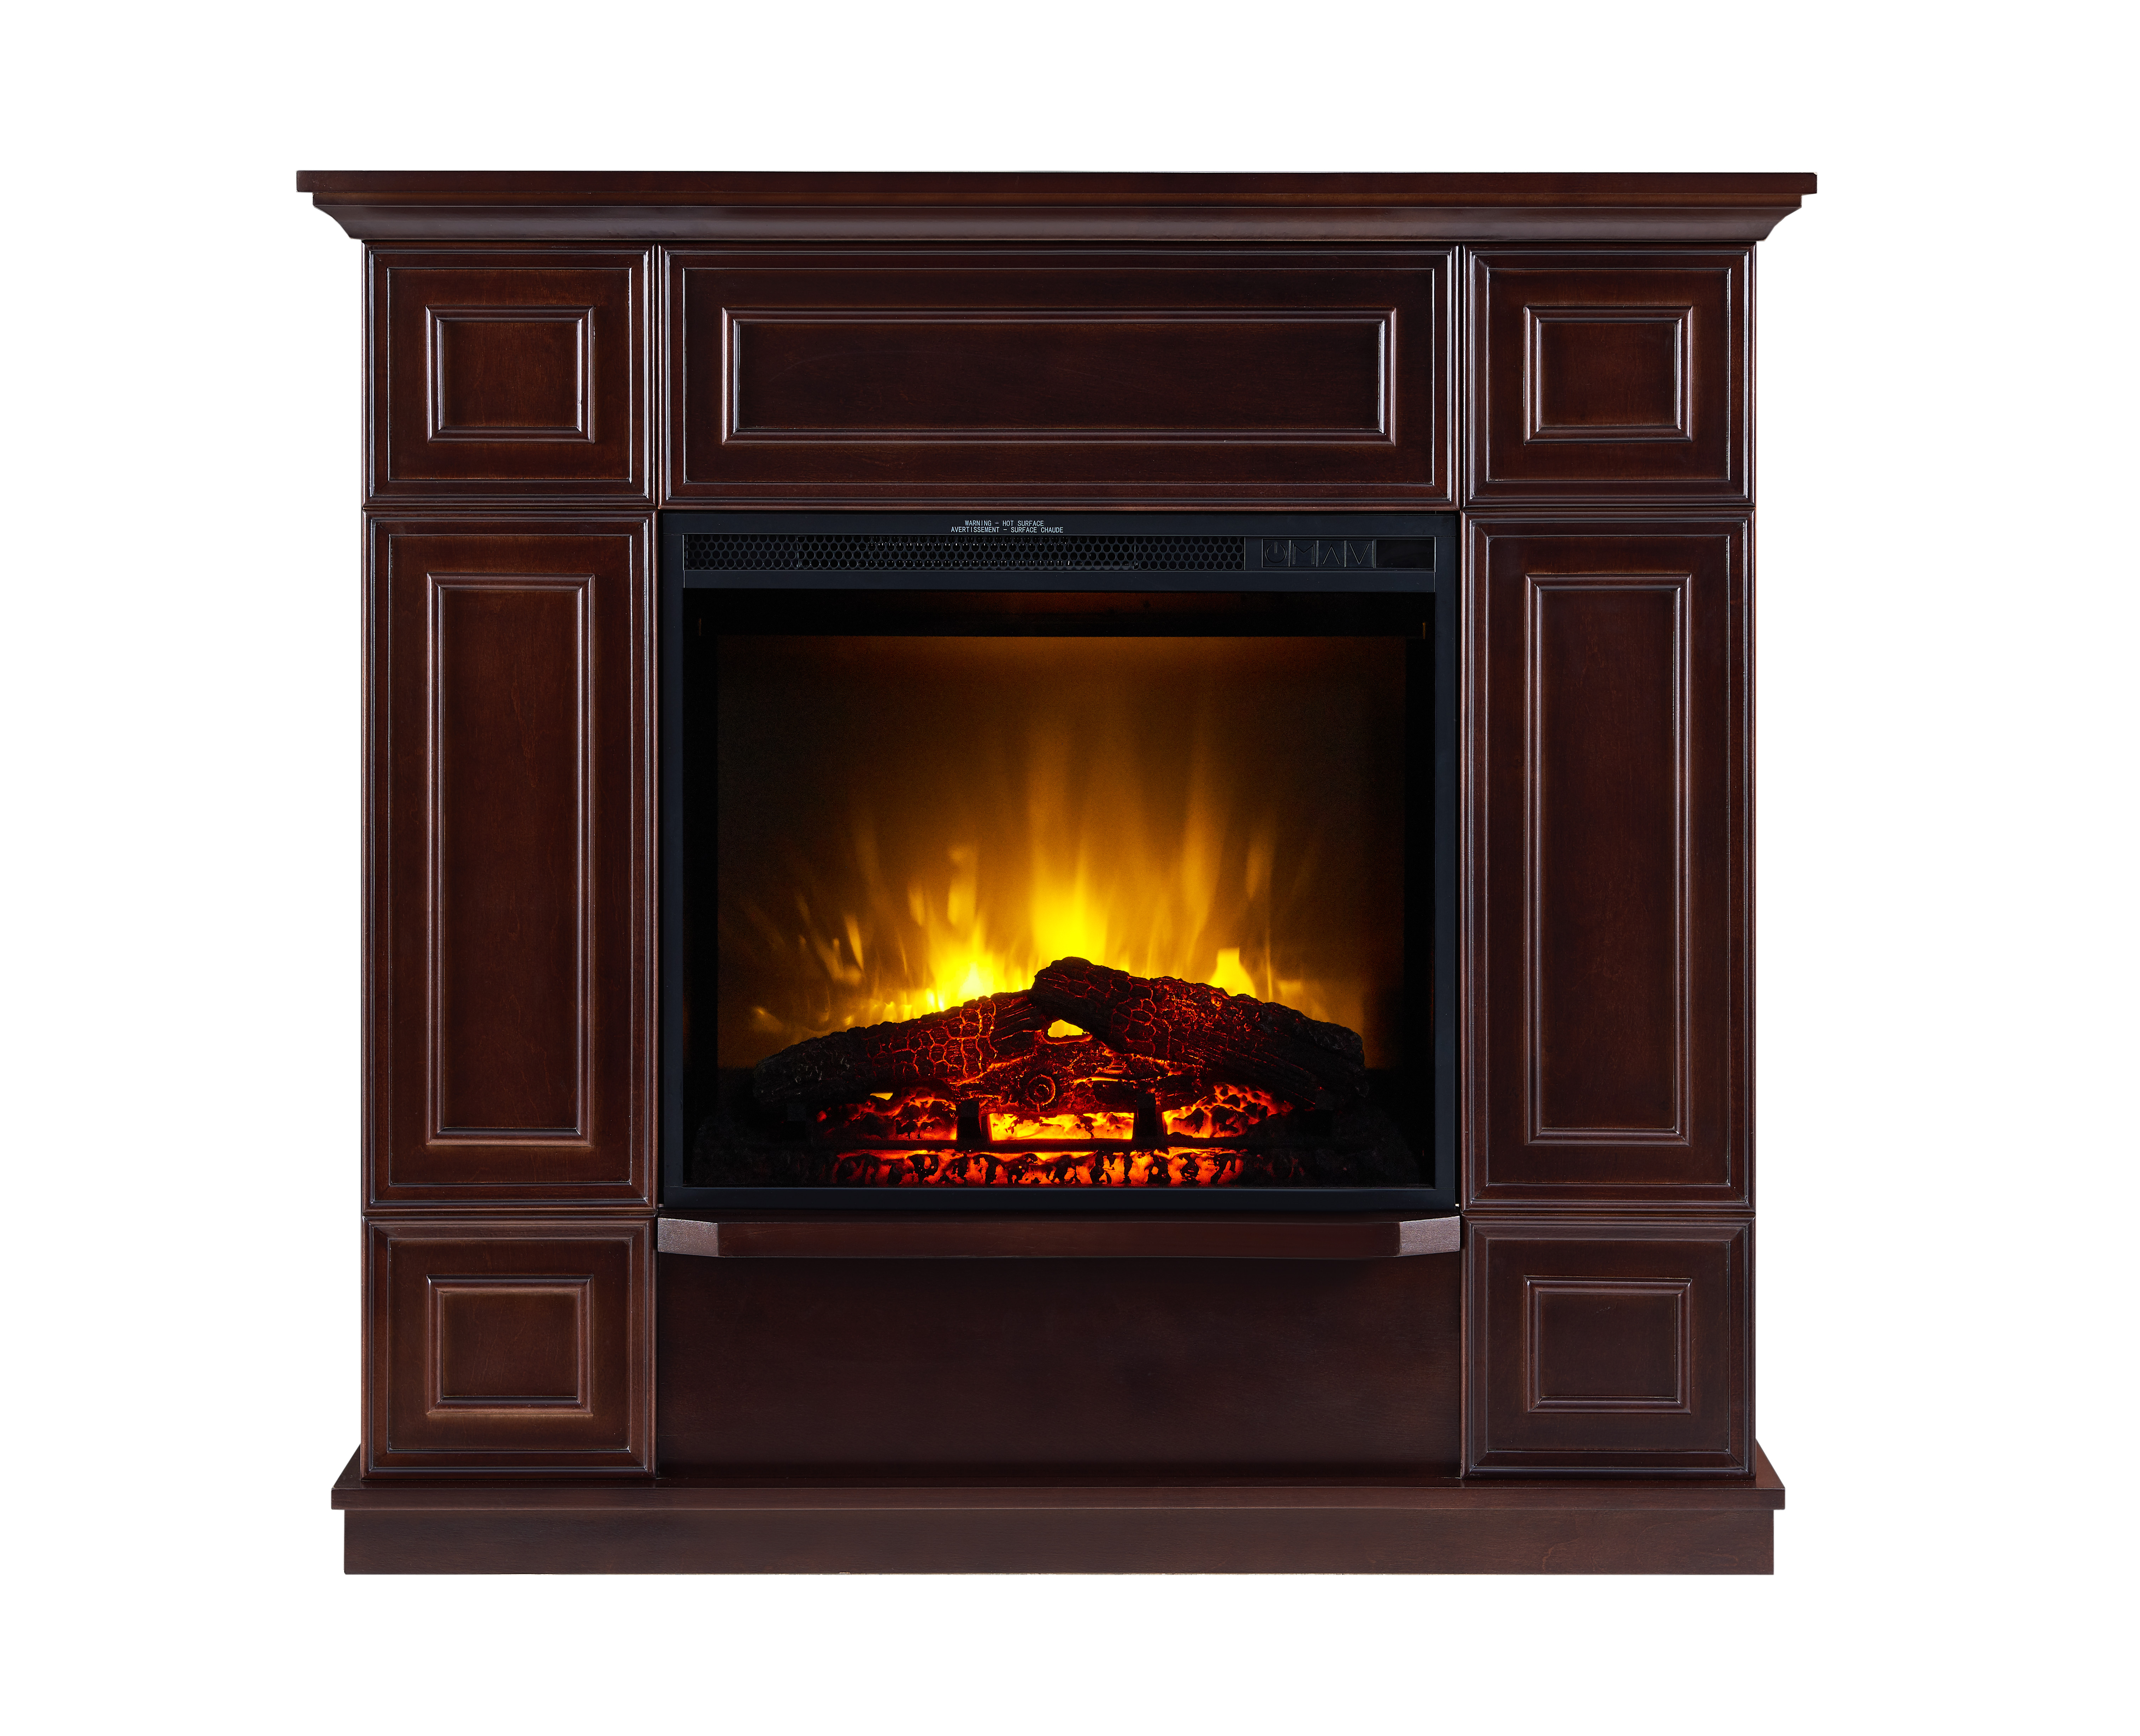 Bold Flame 43.31 inch Electric Fireplace in Dark Chocolate - image 2 of 7